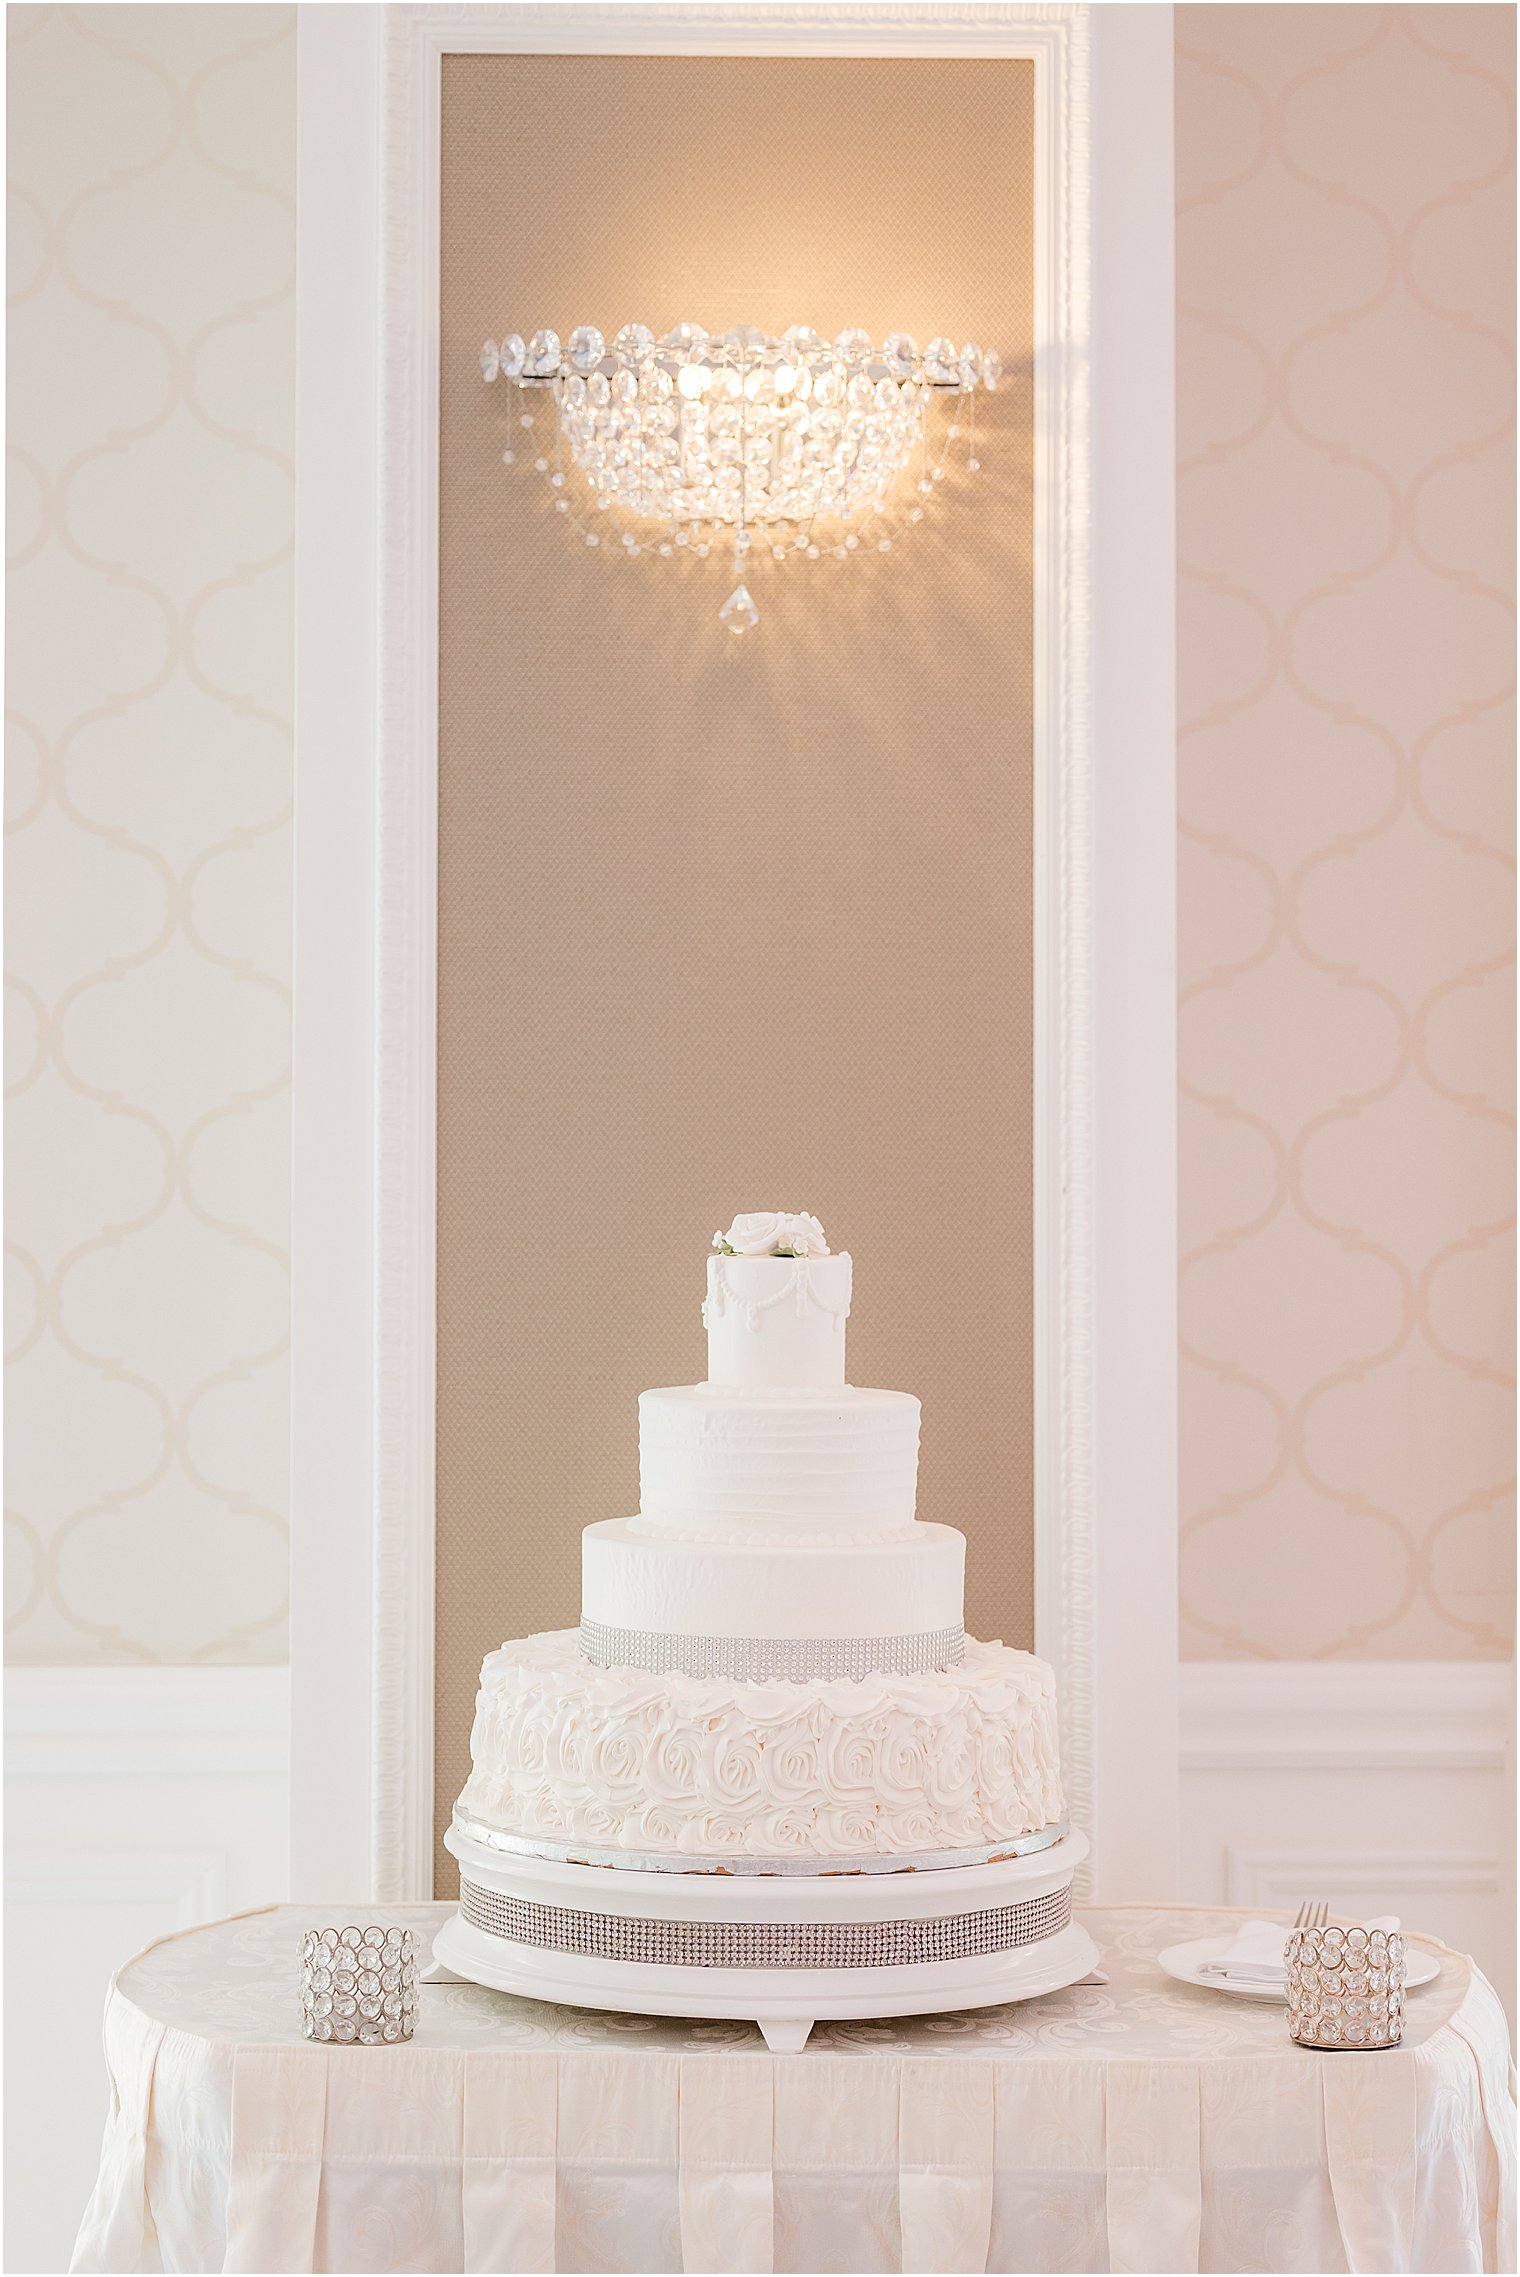 tiered wedding cake with white icing at The English Manor